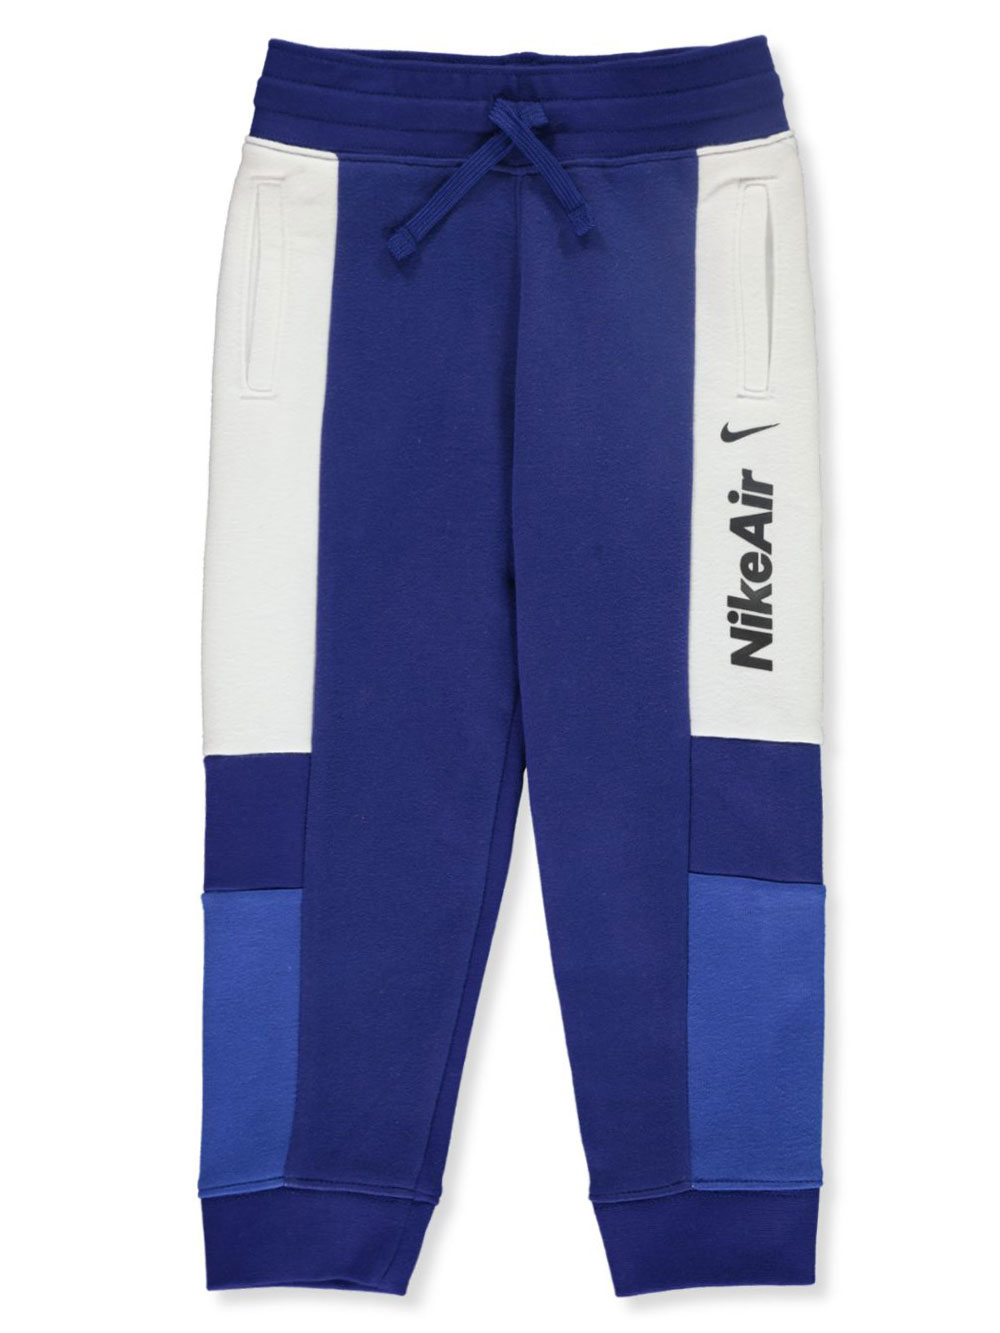 Boys' Joggers by Nike in Deep royal 